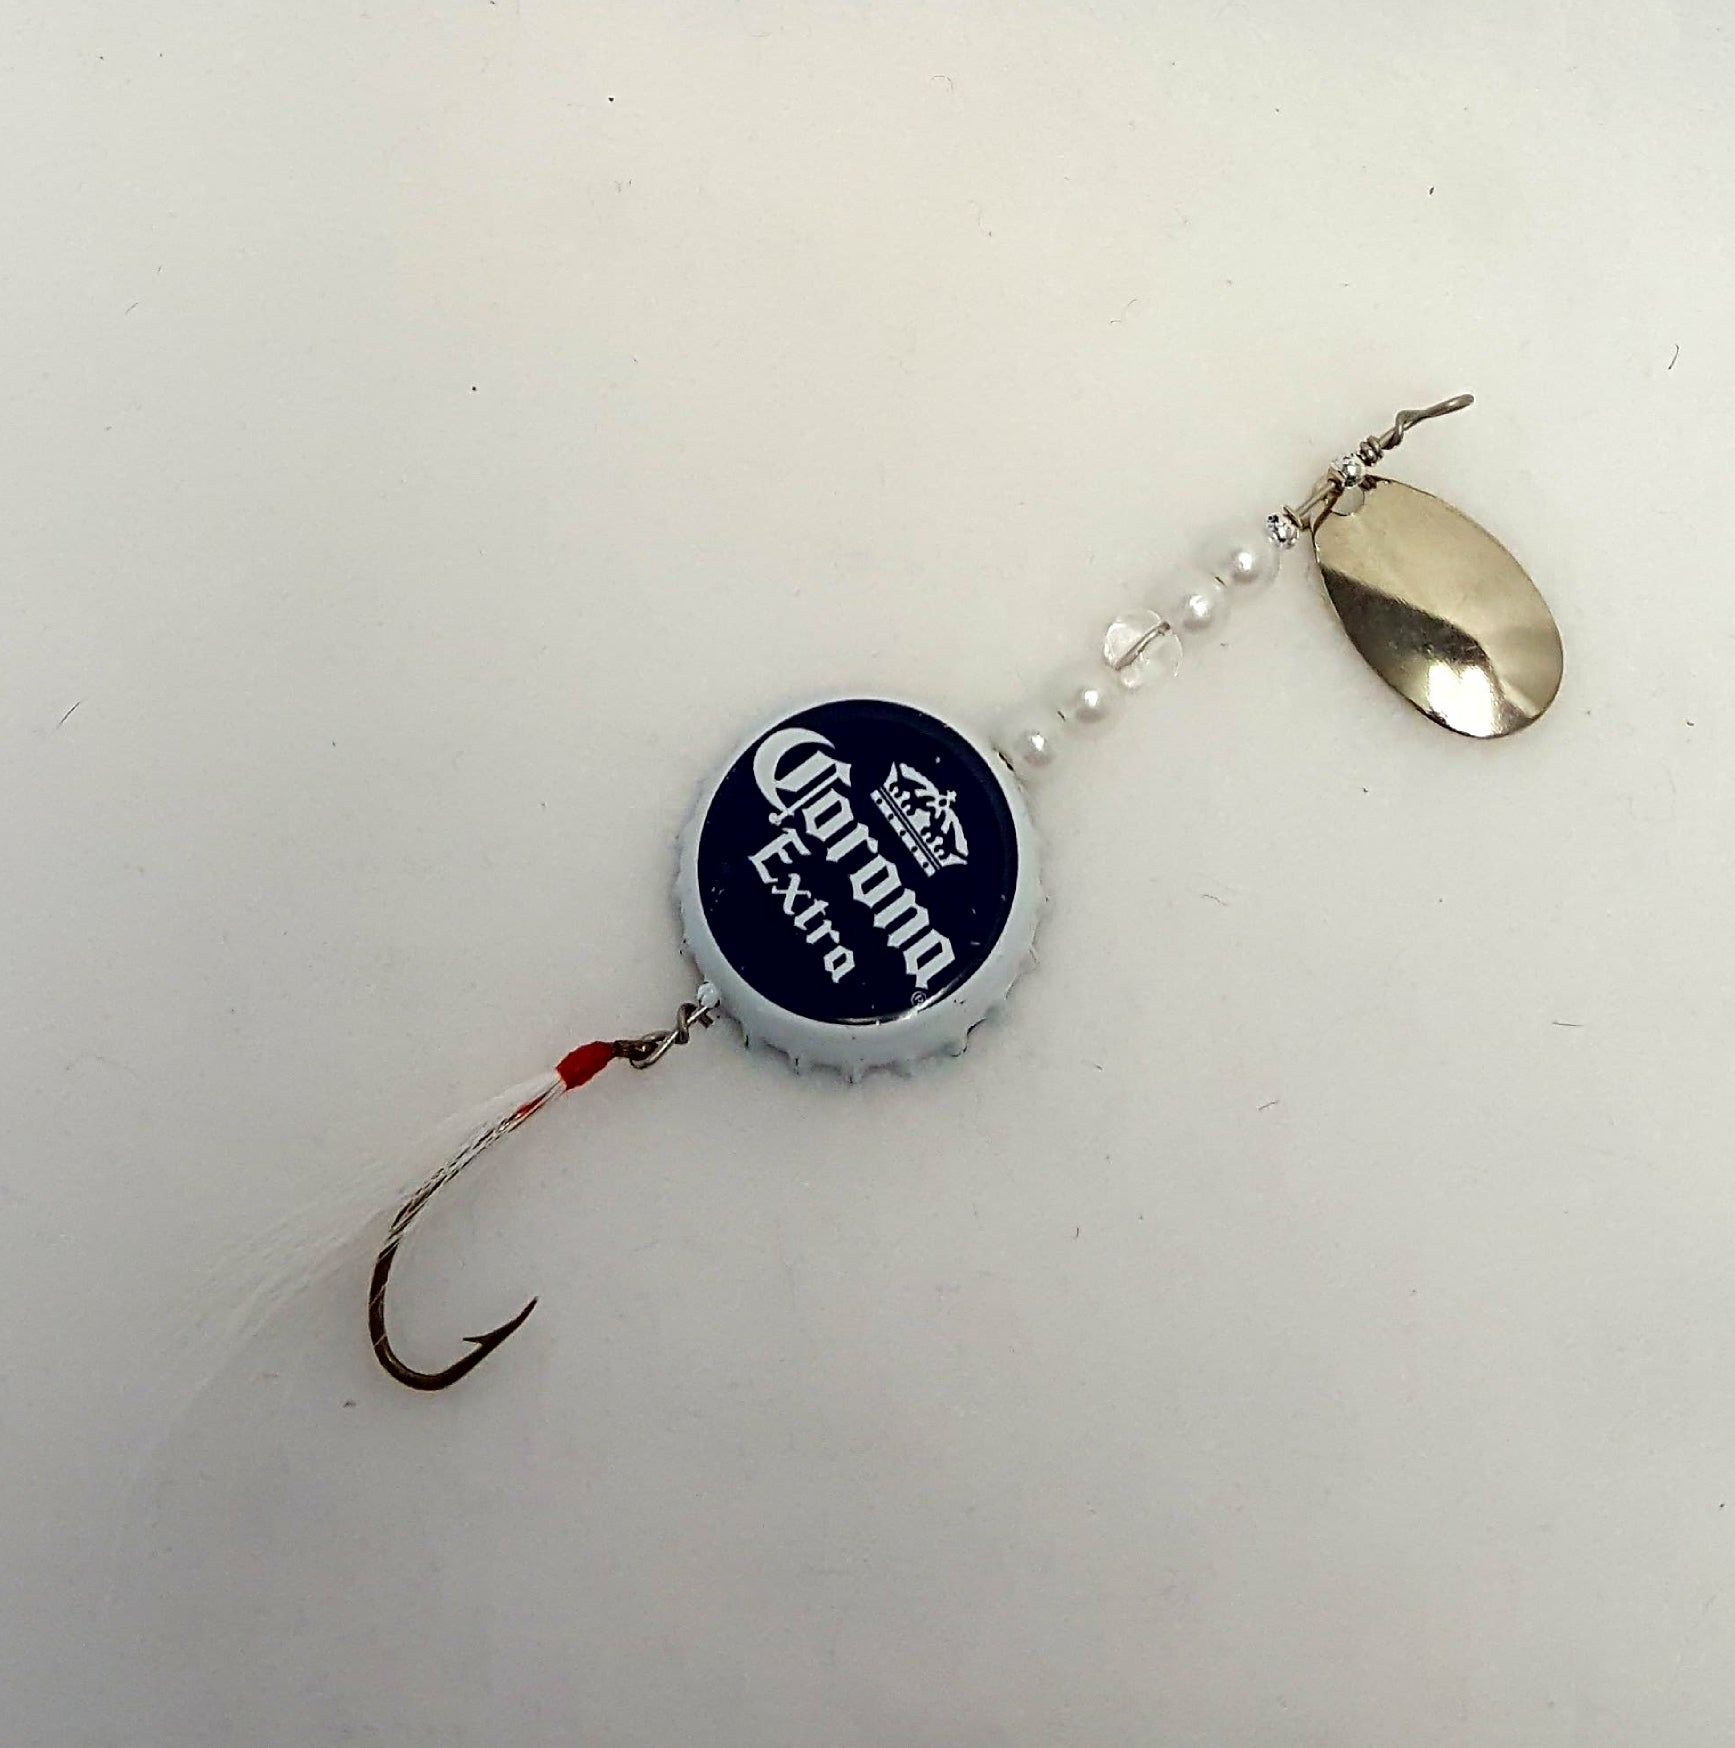 Lure has a white & blue bottle cap with clear & white beads, and white fly.